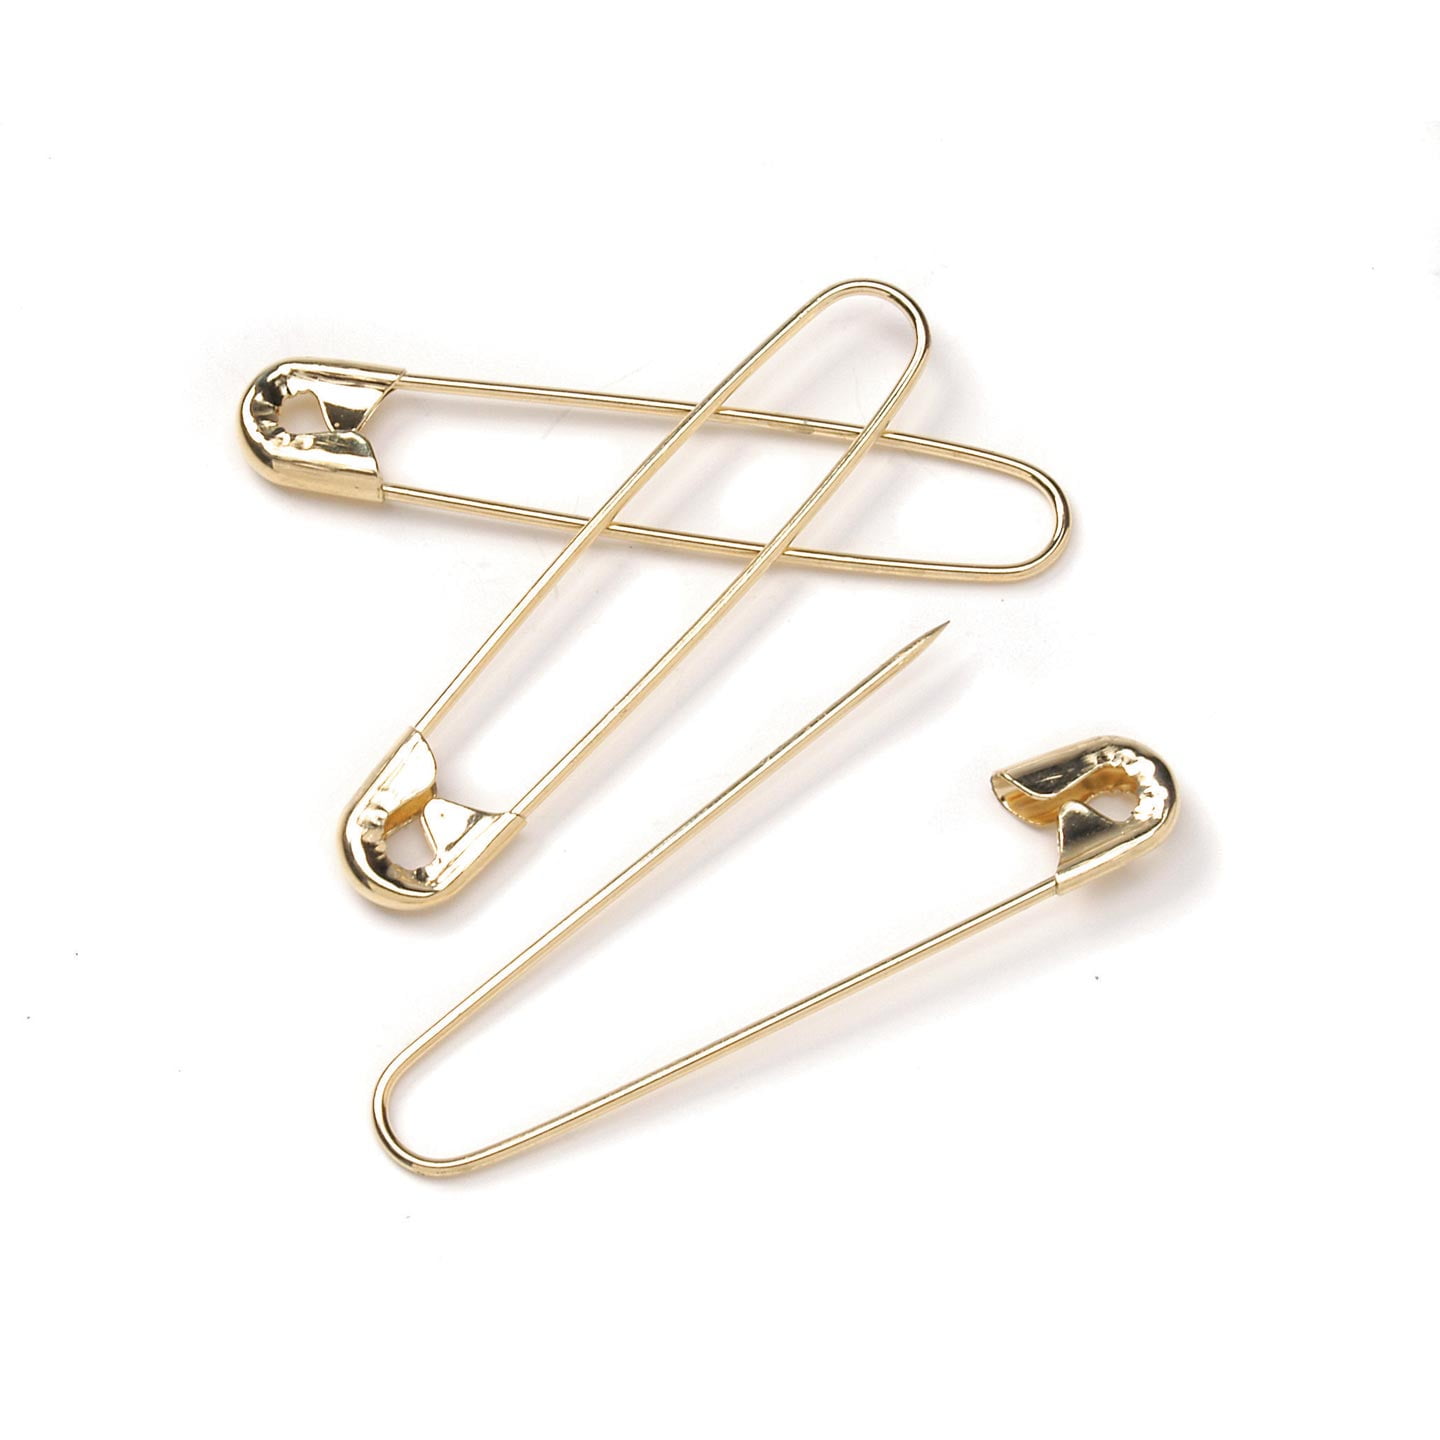 Coil-Less Curved Safety Pins-Size 1 50/Pkg 